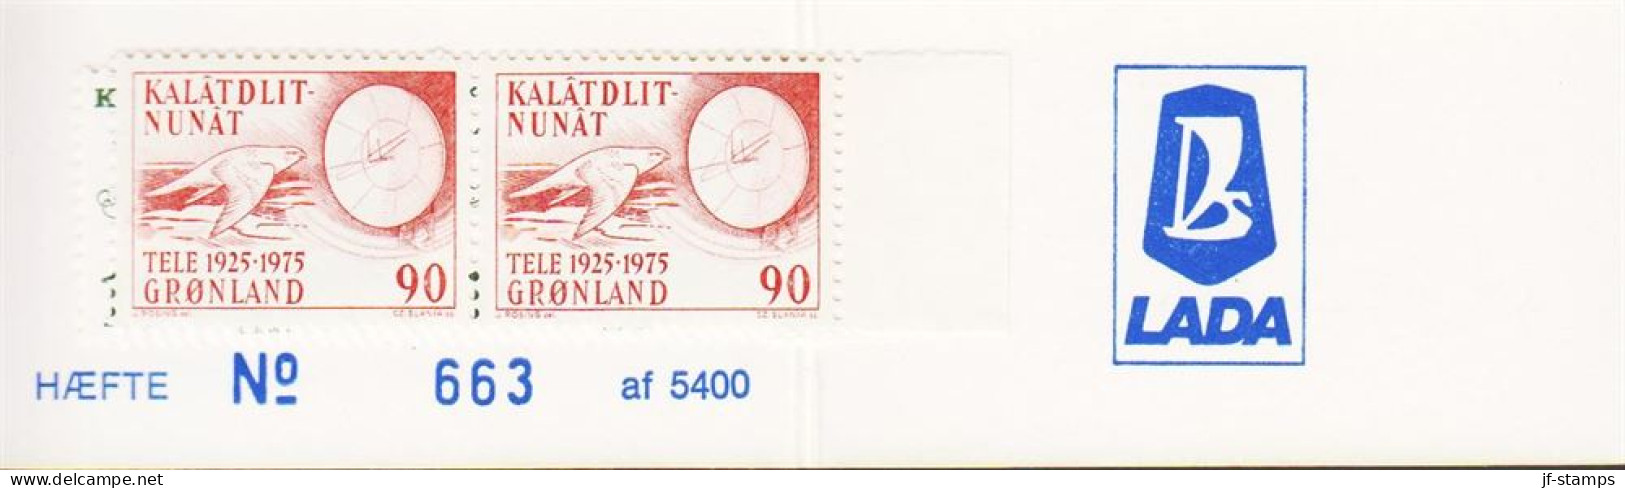 1977. GRØNLAND. TELE 90 Øre Falcon In Pair Together With 10 Øre Margrethe In Pair. DANSK ... (Michel 94 + 84) - JF545589 - Neufs